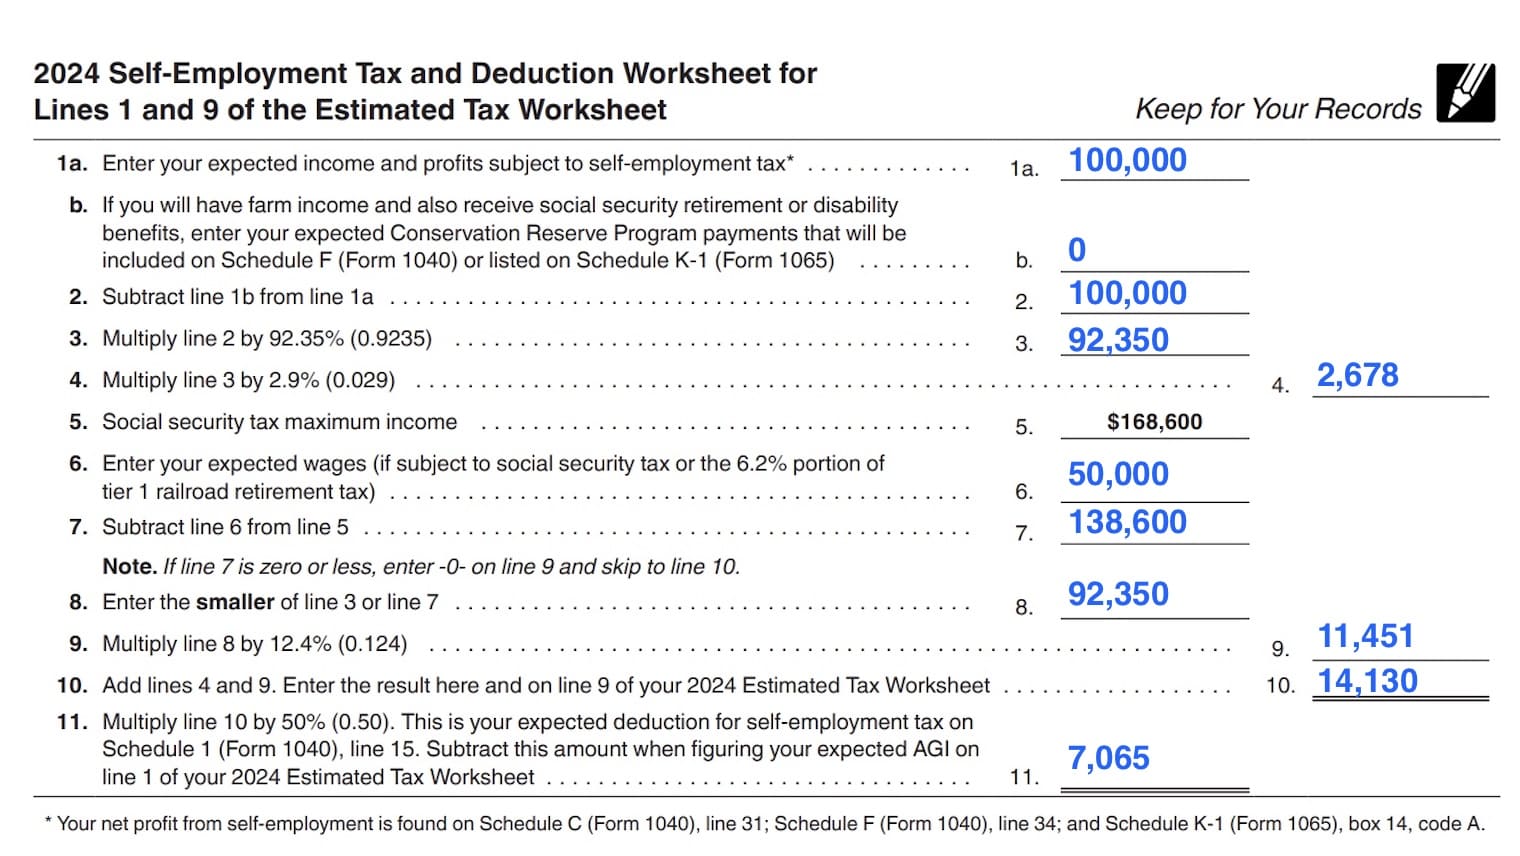 irs form 1040-es self-employment tax and deduction worksheet, completed